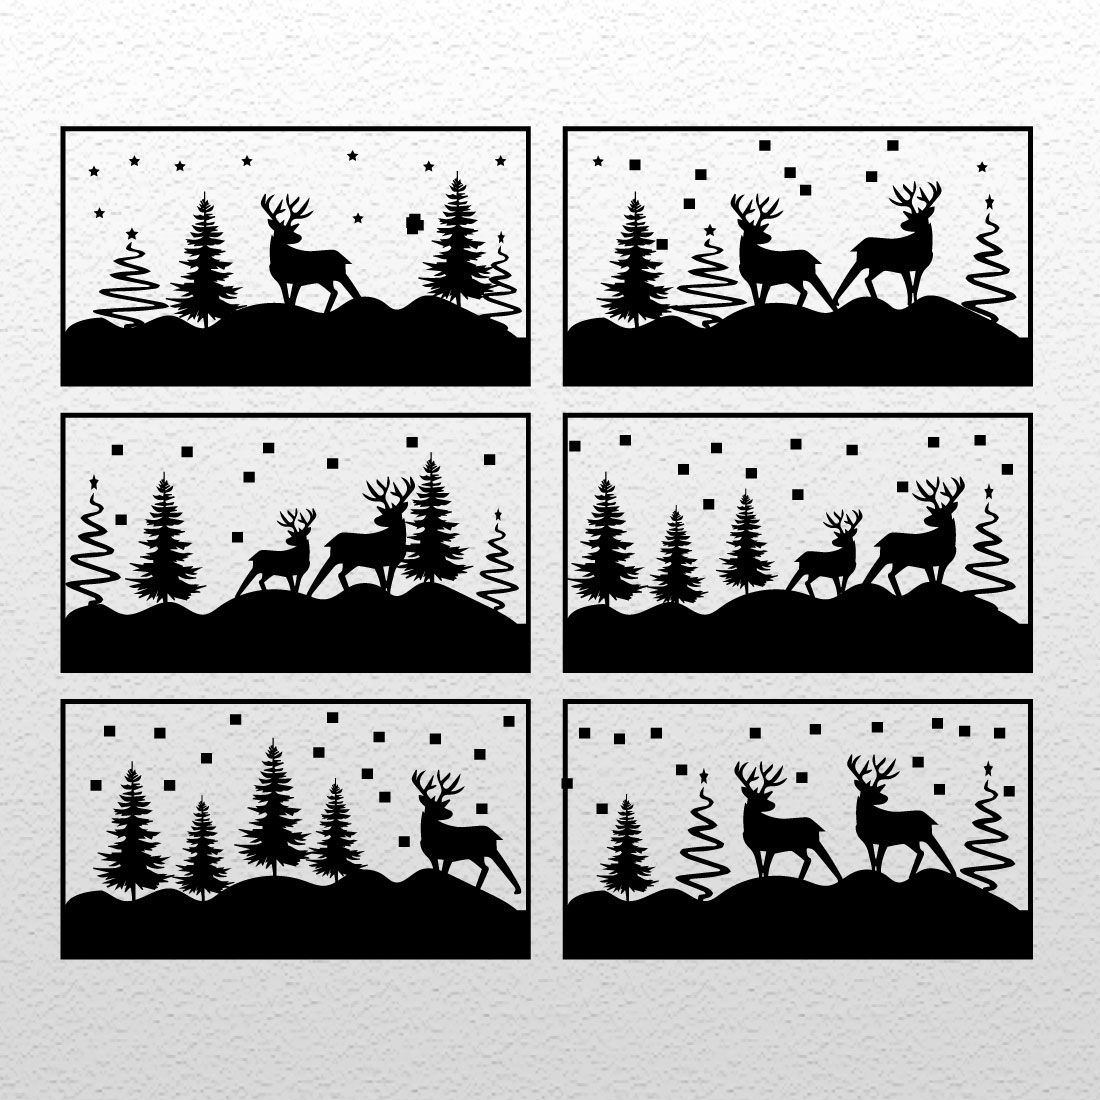 Pack of exquisite images of silhouettes of deer in a clearing